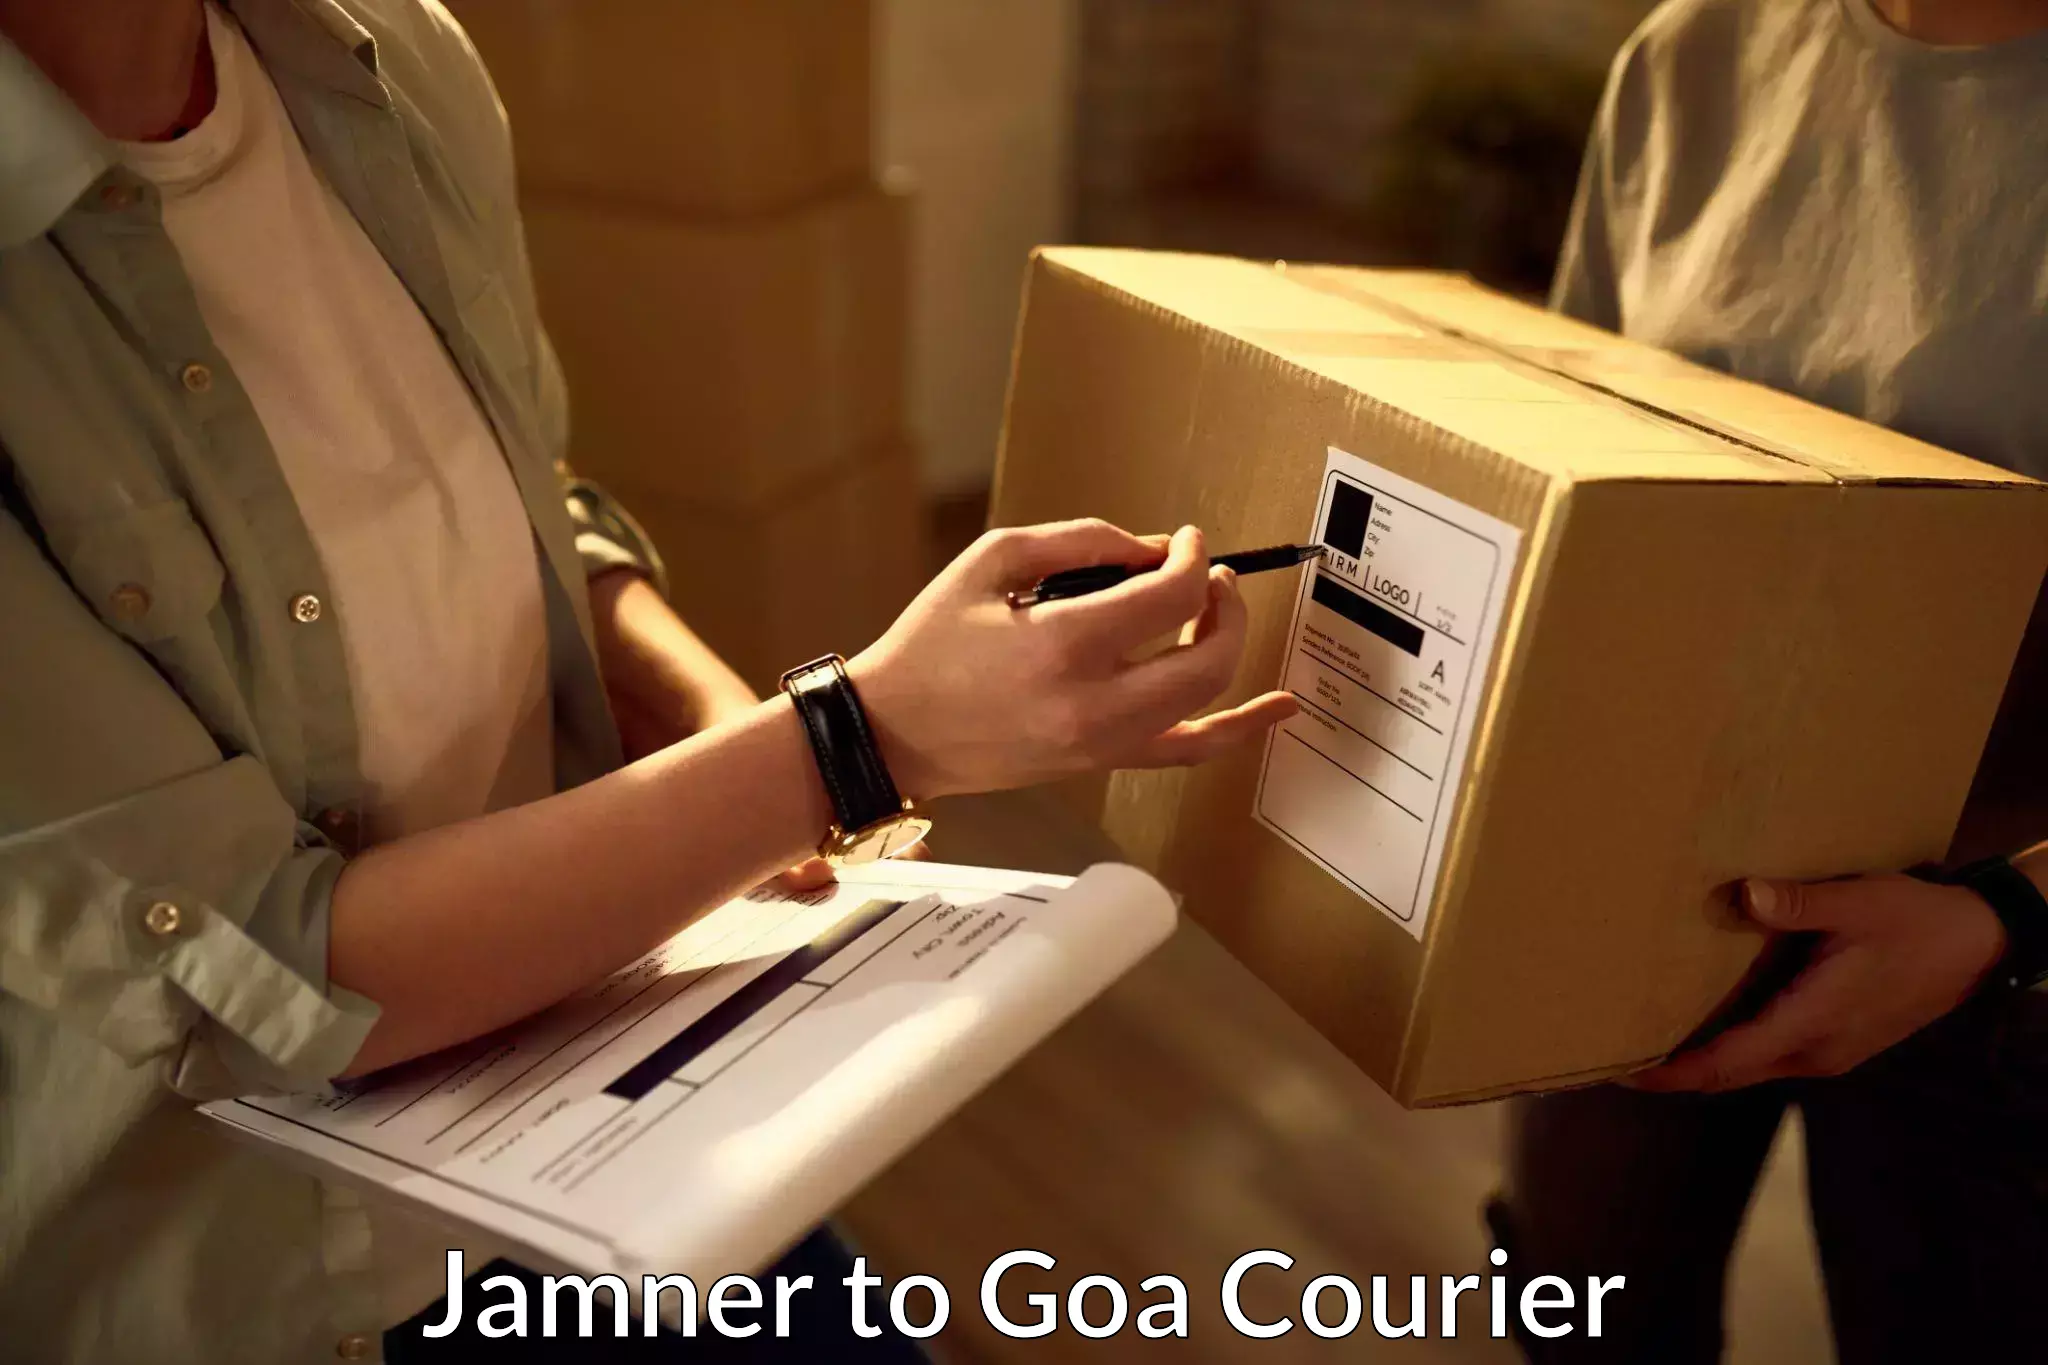 Local delivery service Jamner to Goa